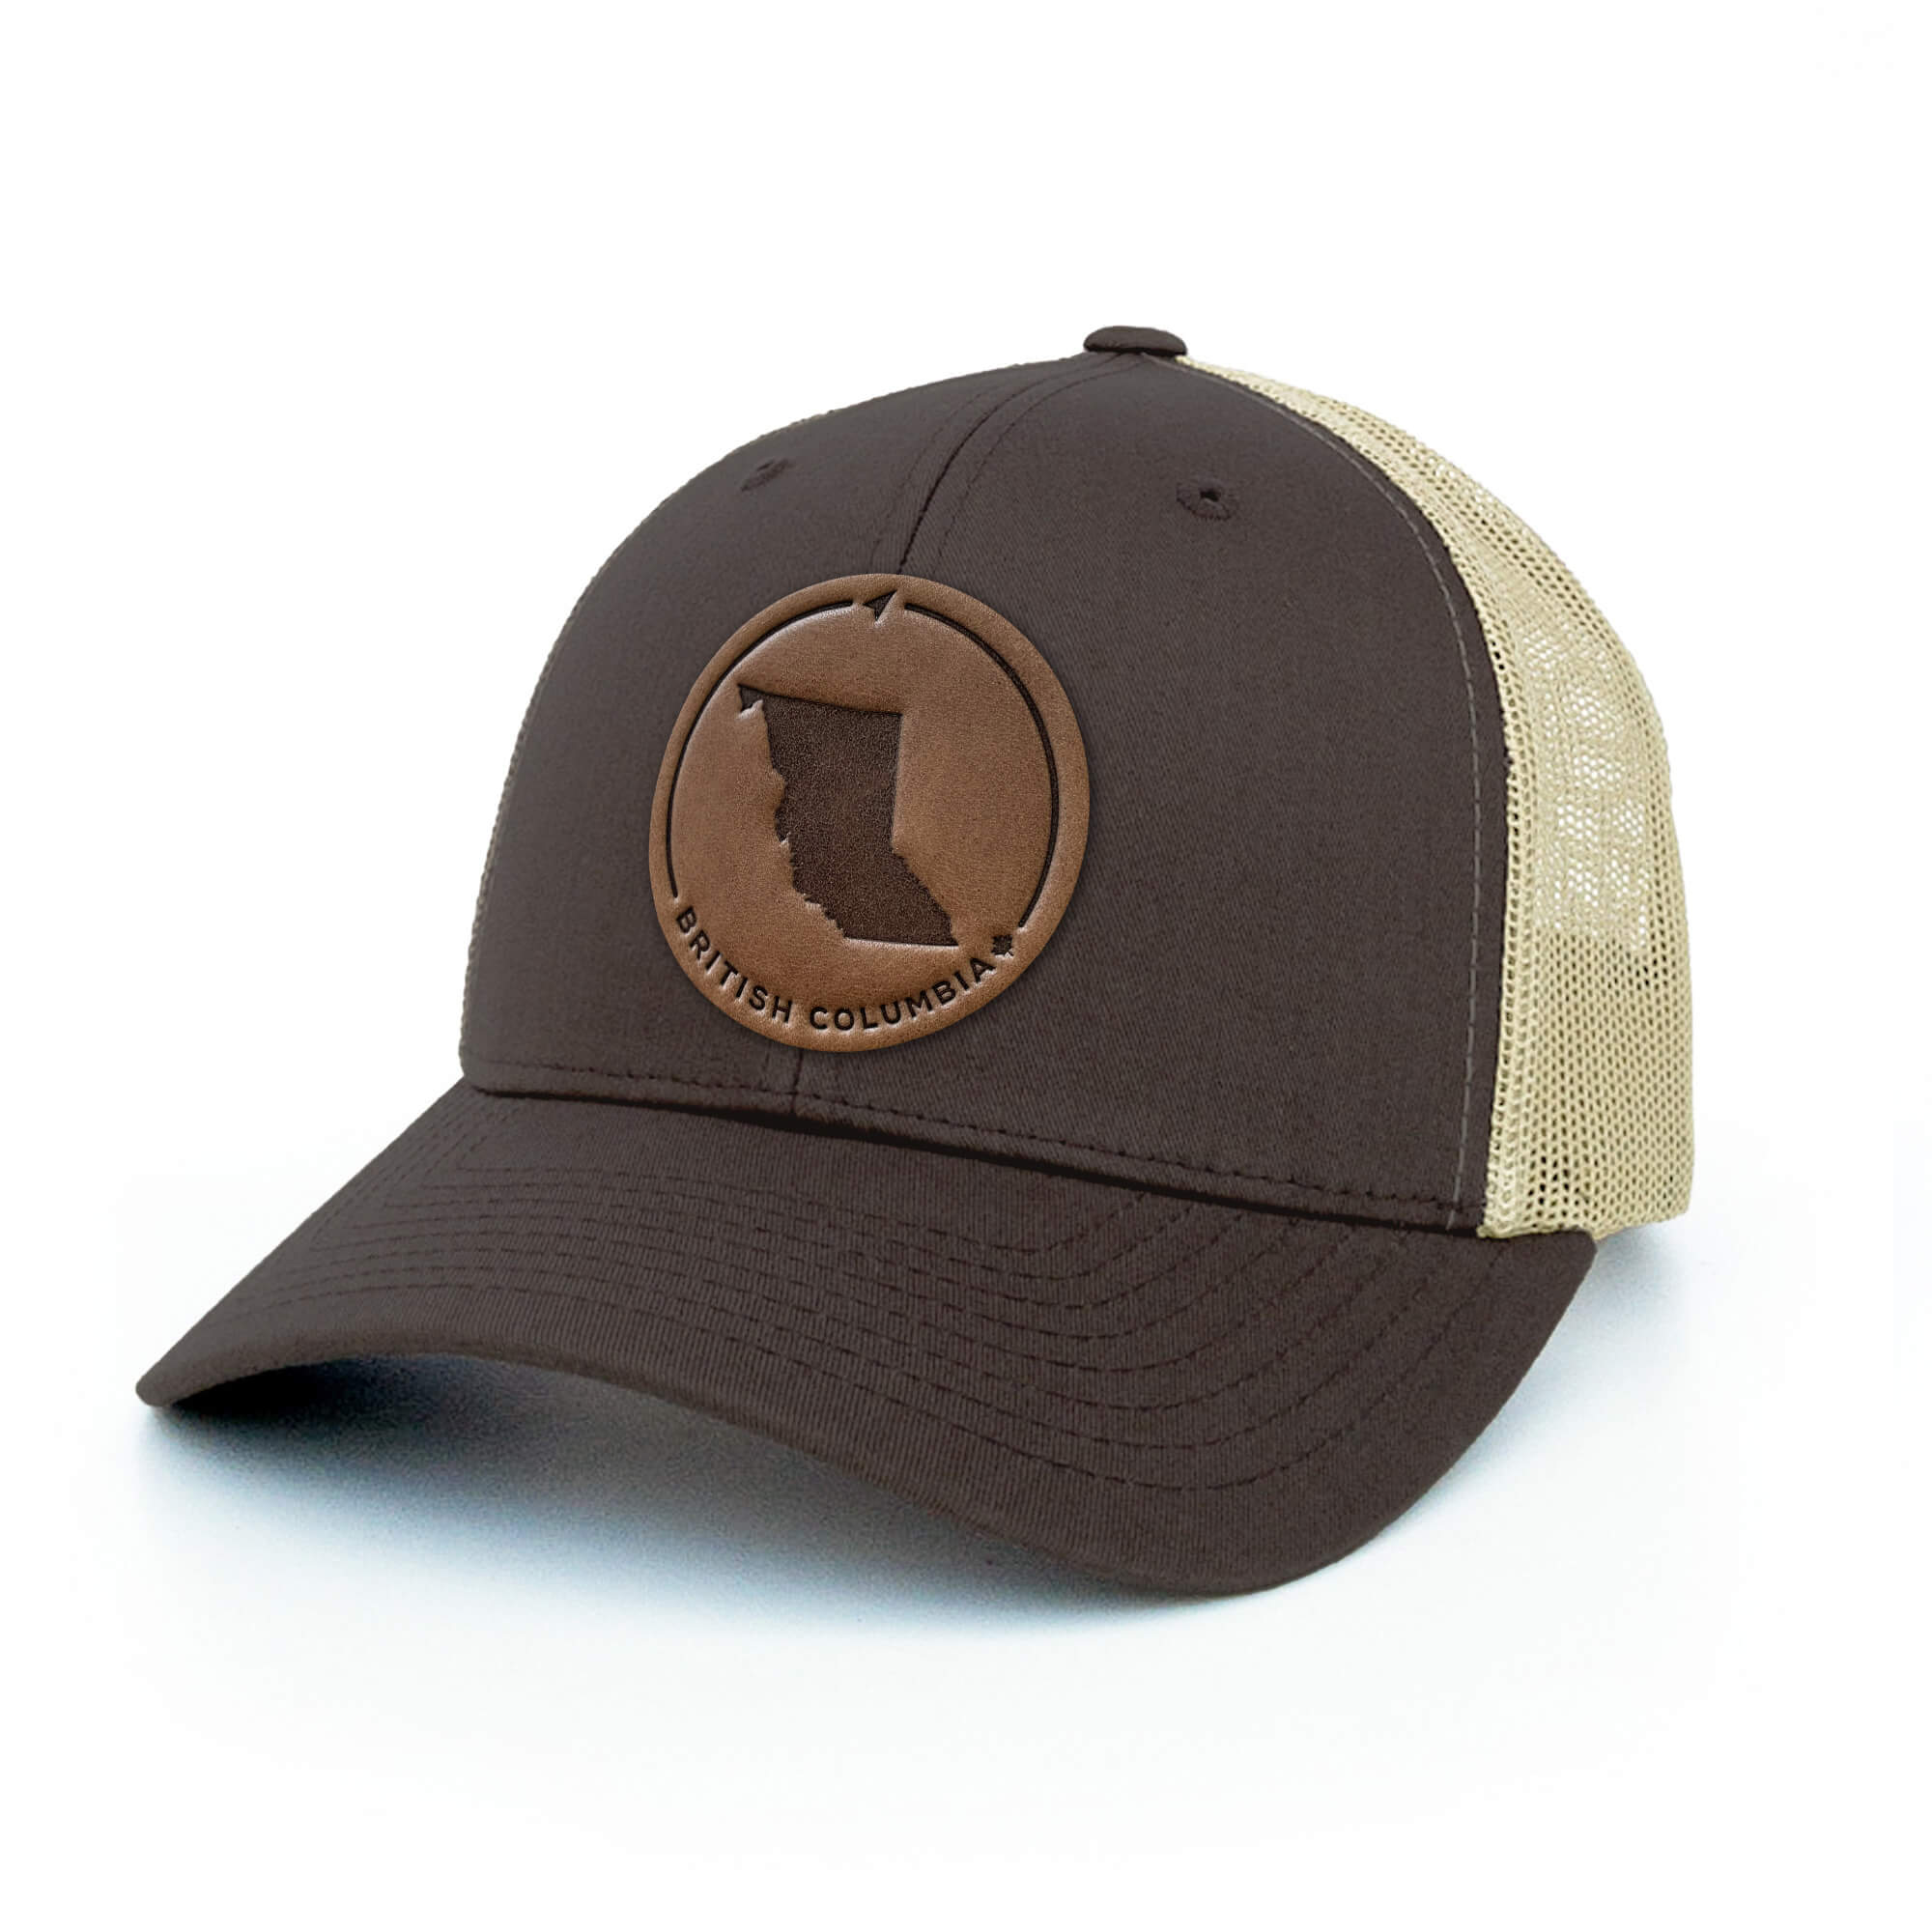 Brown khaki trucker hat with full-grain leather patch of British Columbia | BLACK-002-004, CHARC-002-004, NAVY-002-004, HGREY-002-004, MOSS-002-004, BROWN-002-004